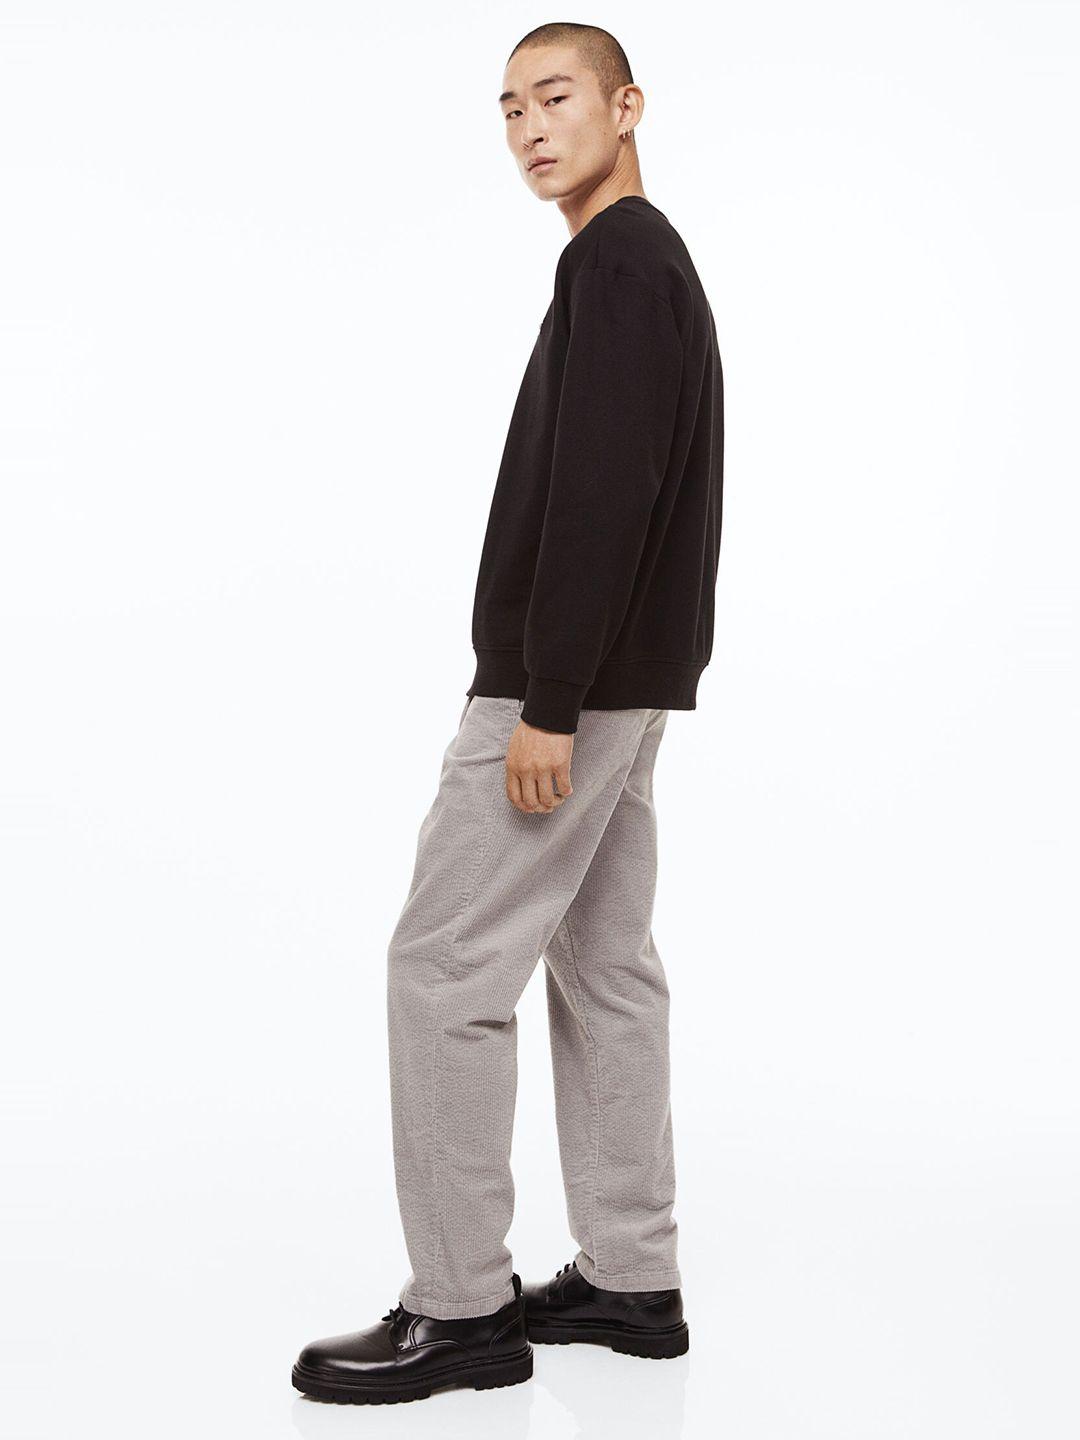 h&m relaxed fit appliqud sweatshirt